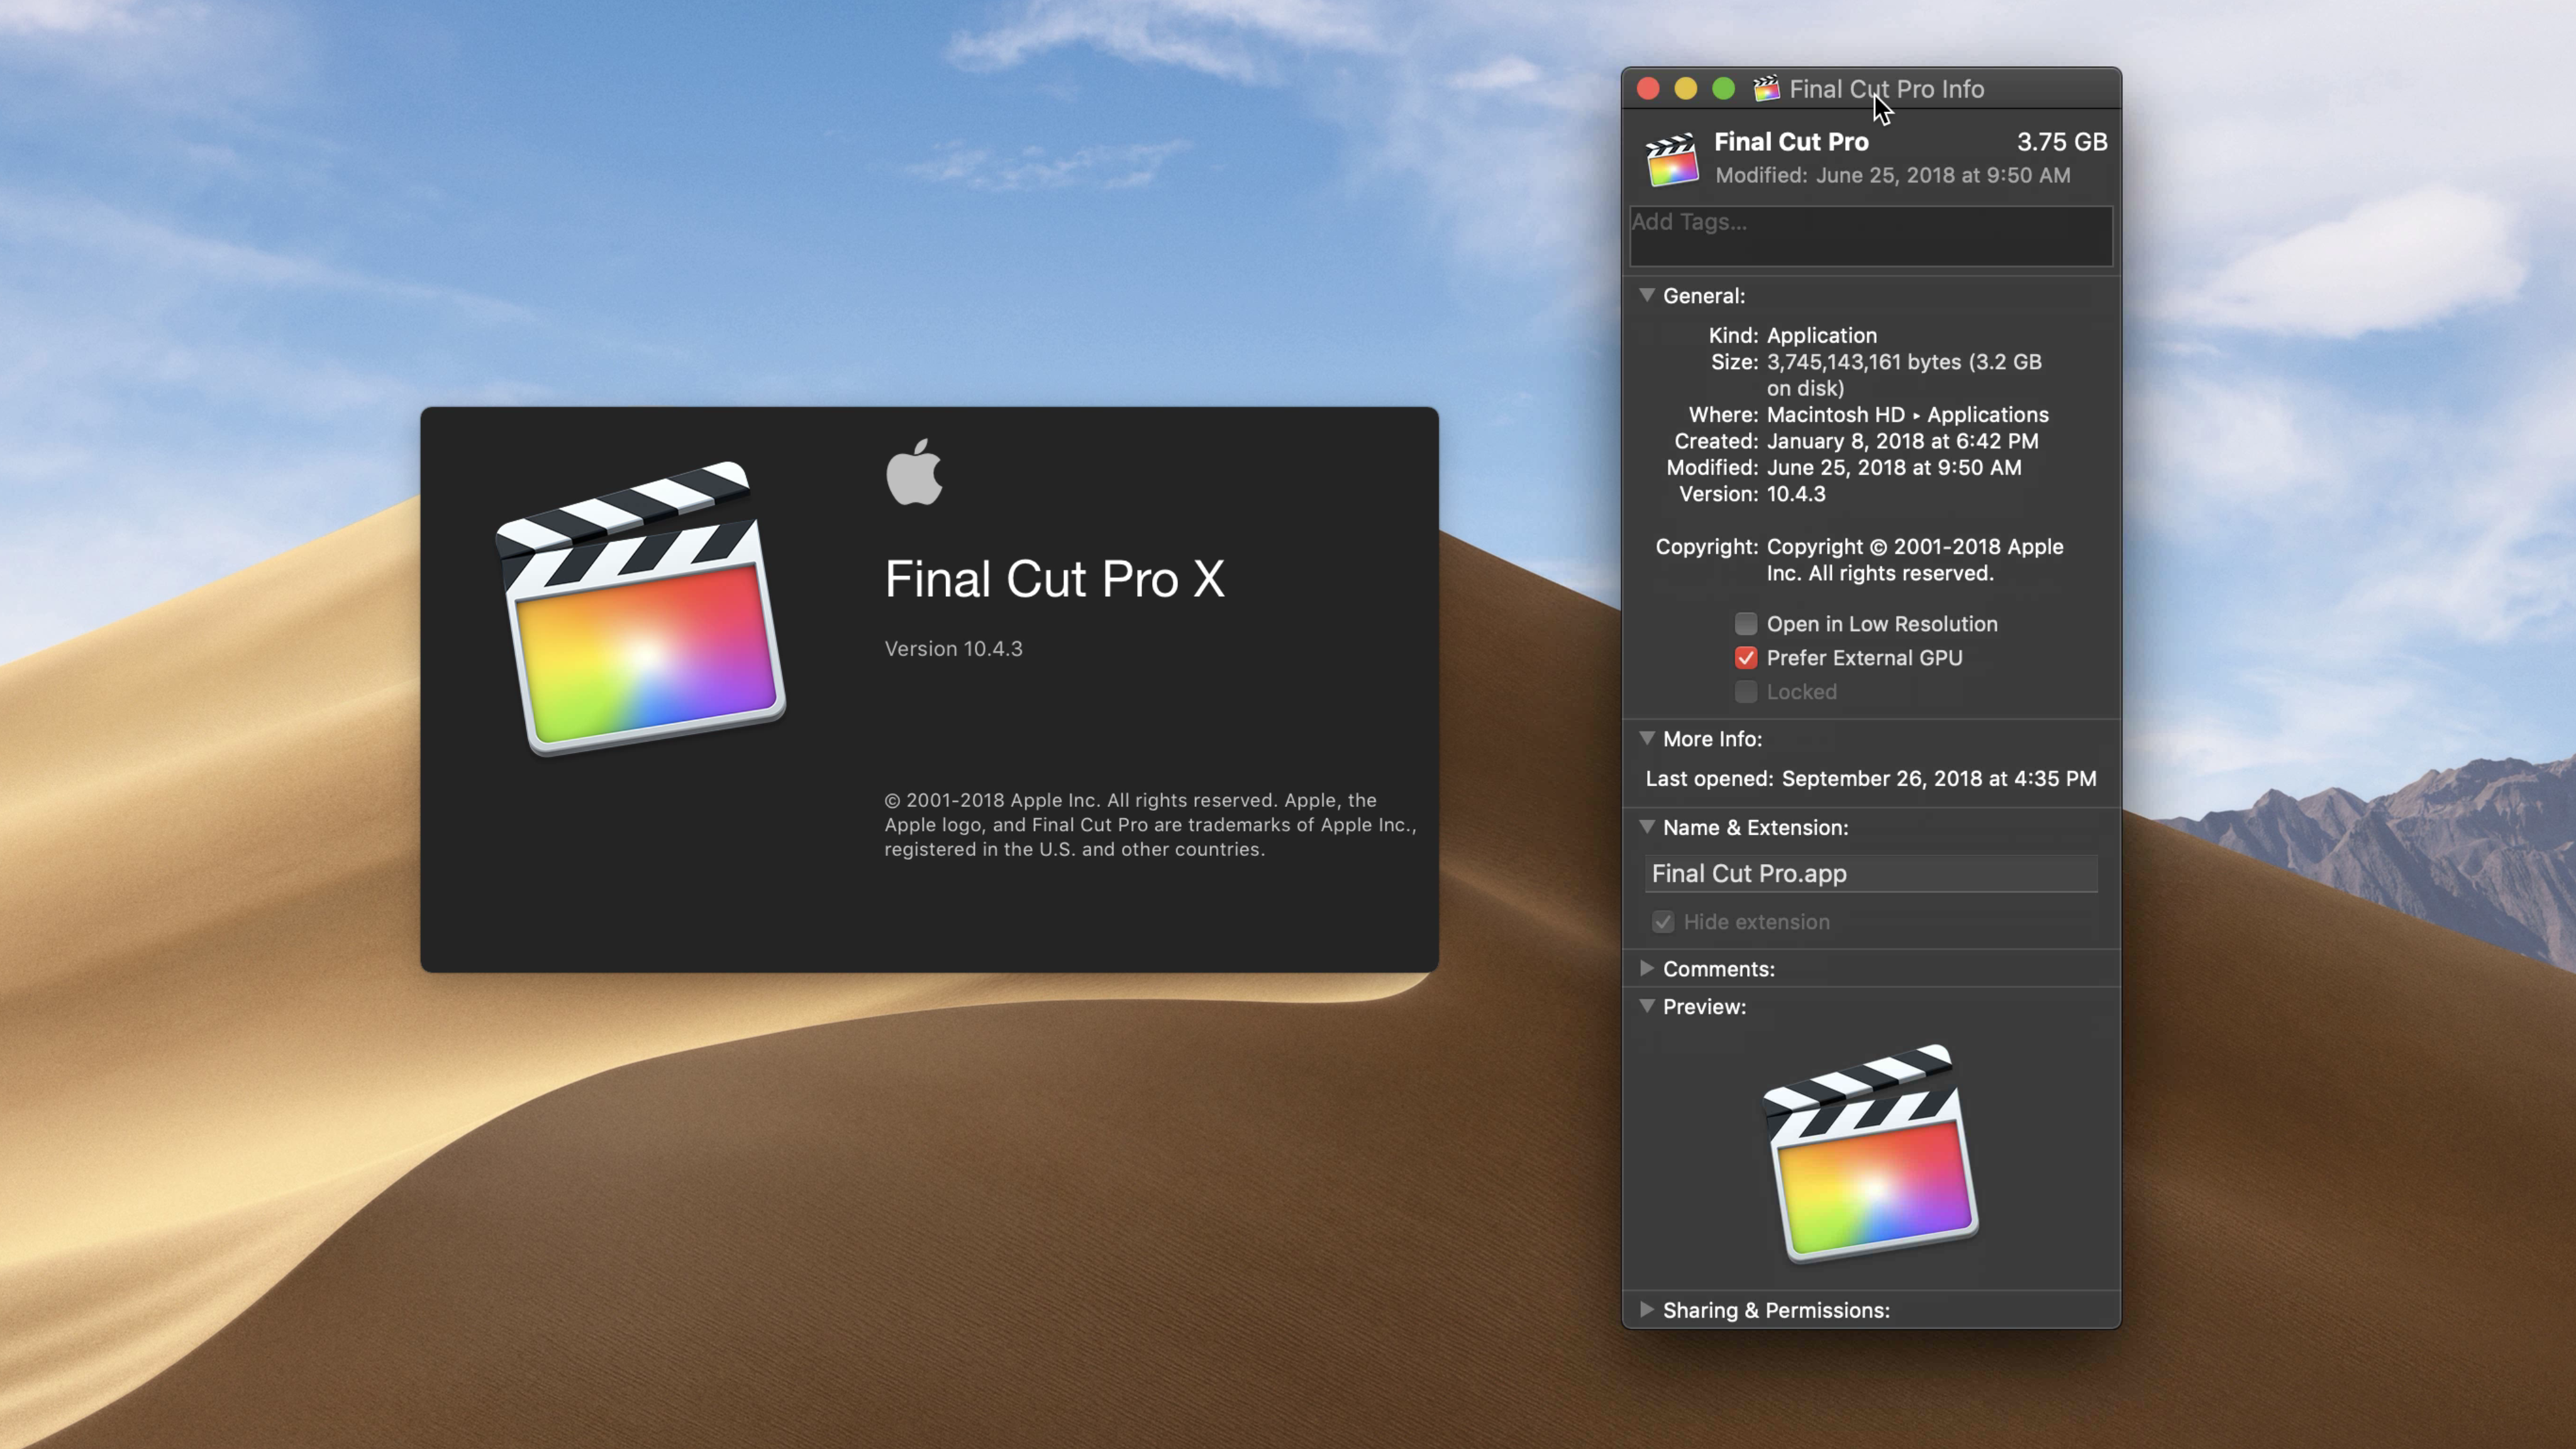 final cut pro free download for windows 8